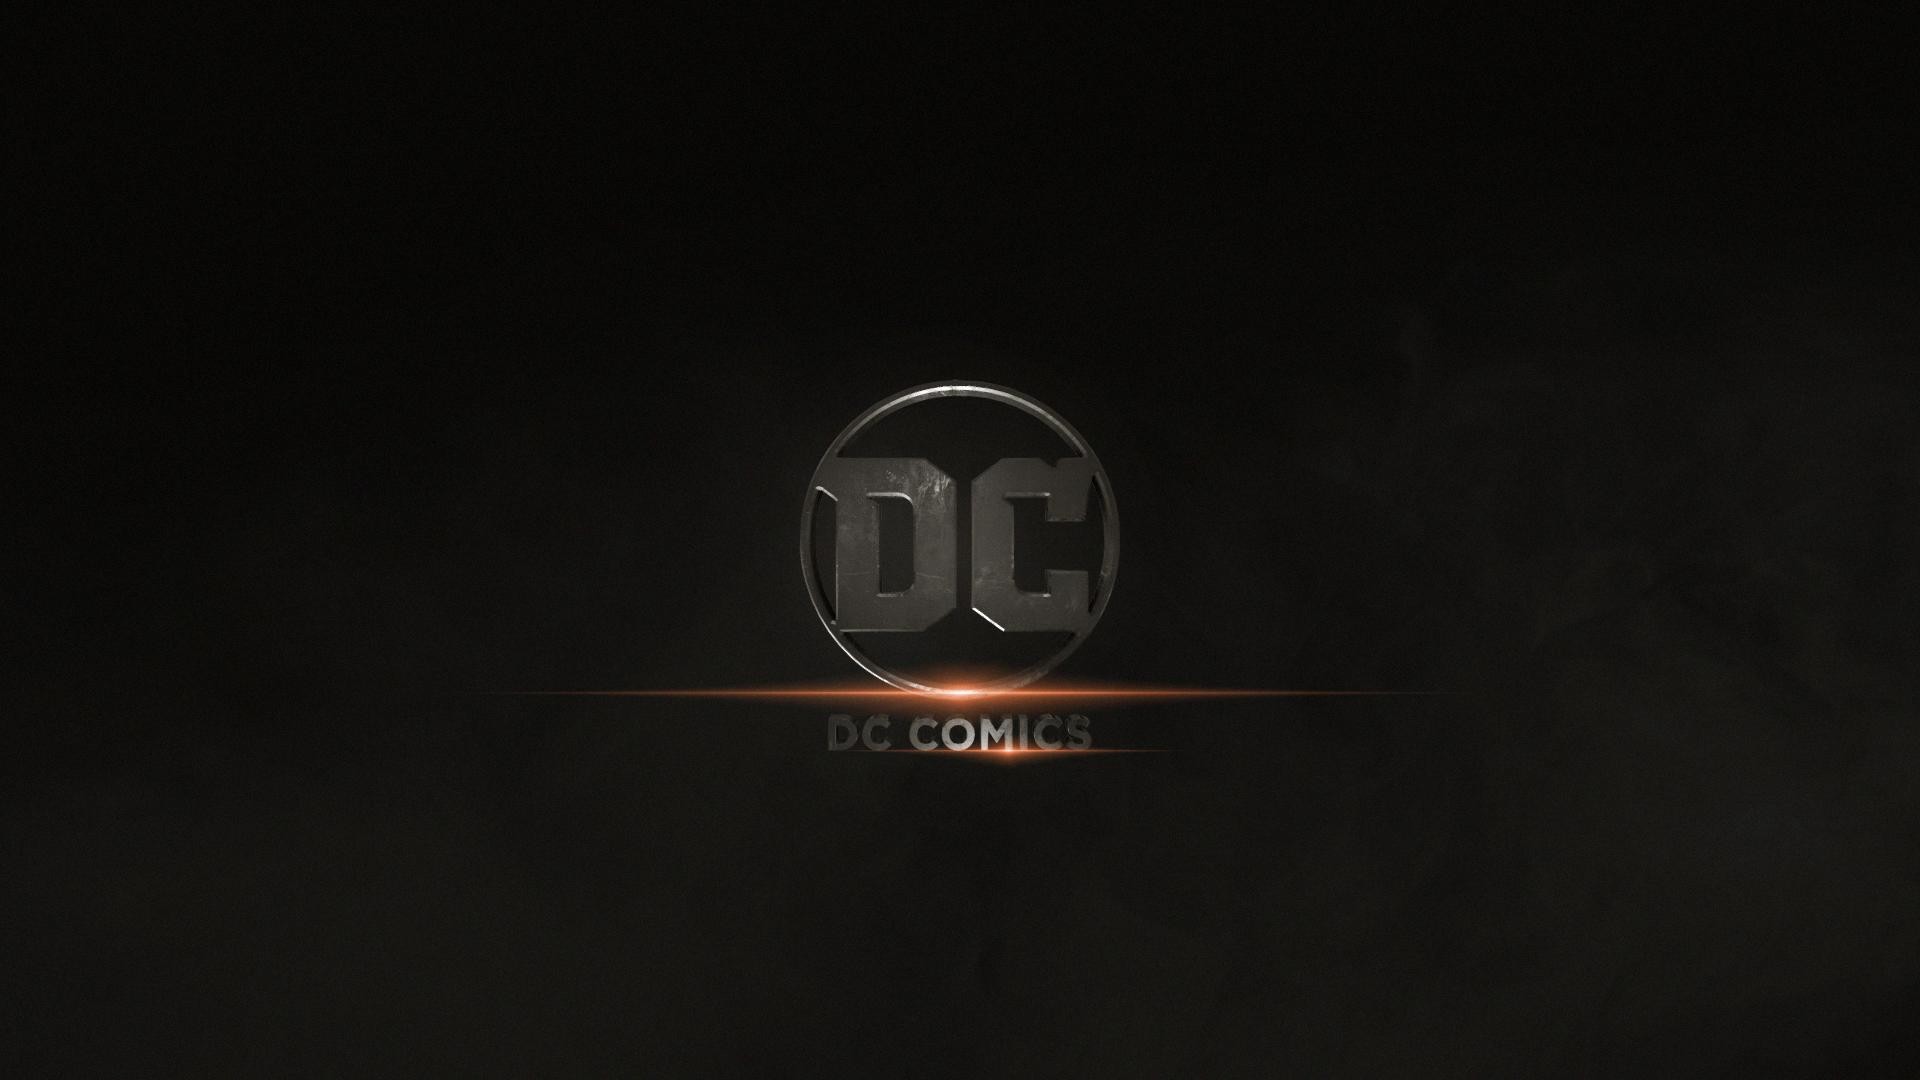 1920x1080 My mockup of the new DC logo for the Justice League teaser trailer.